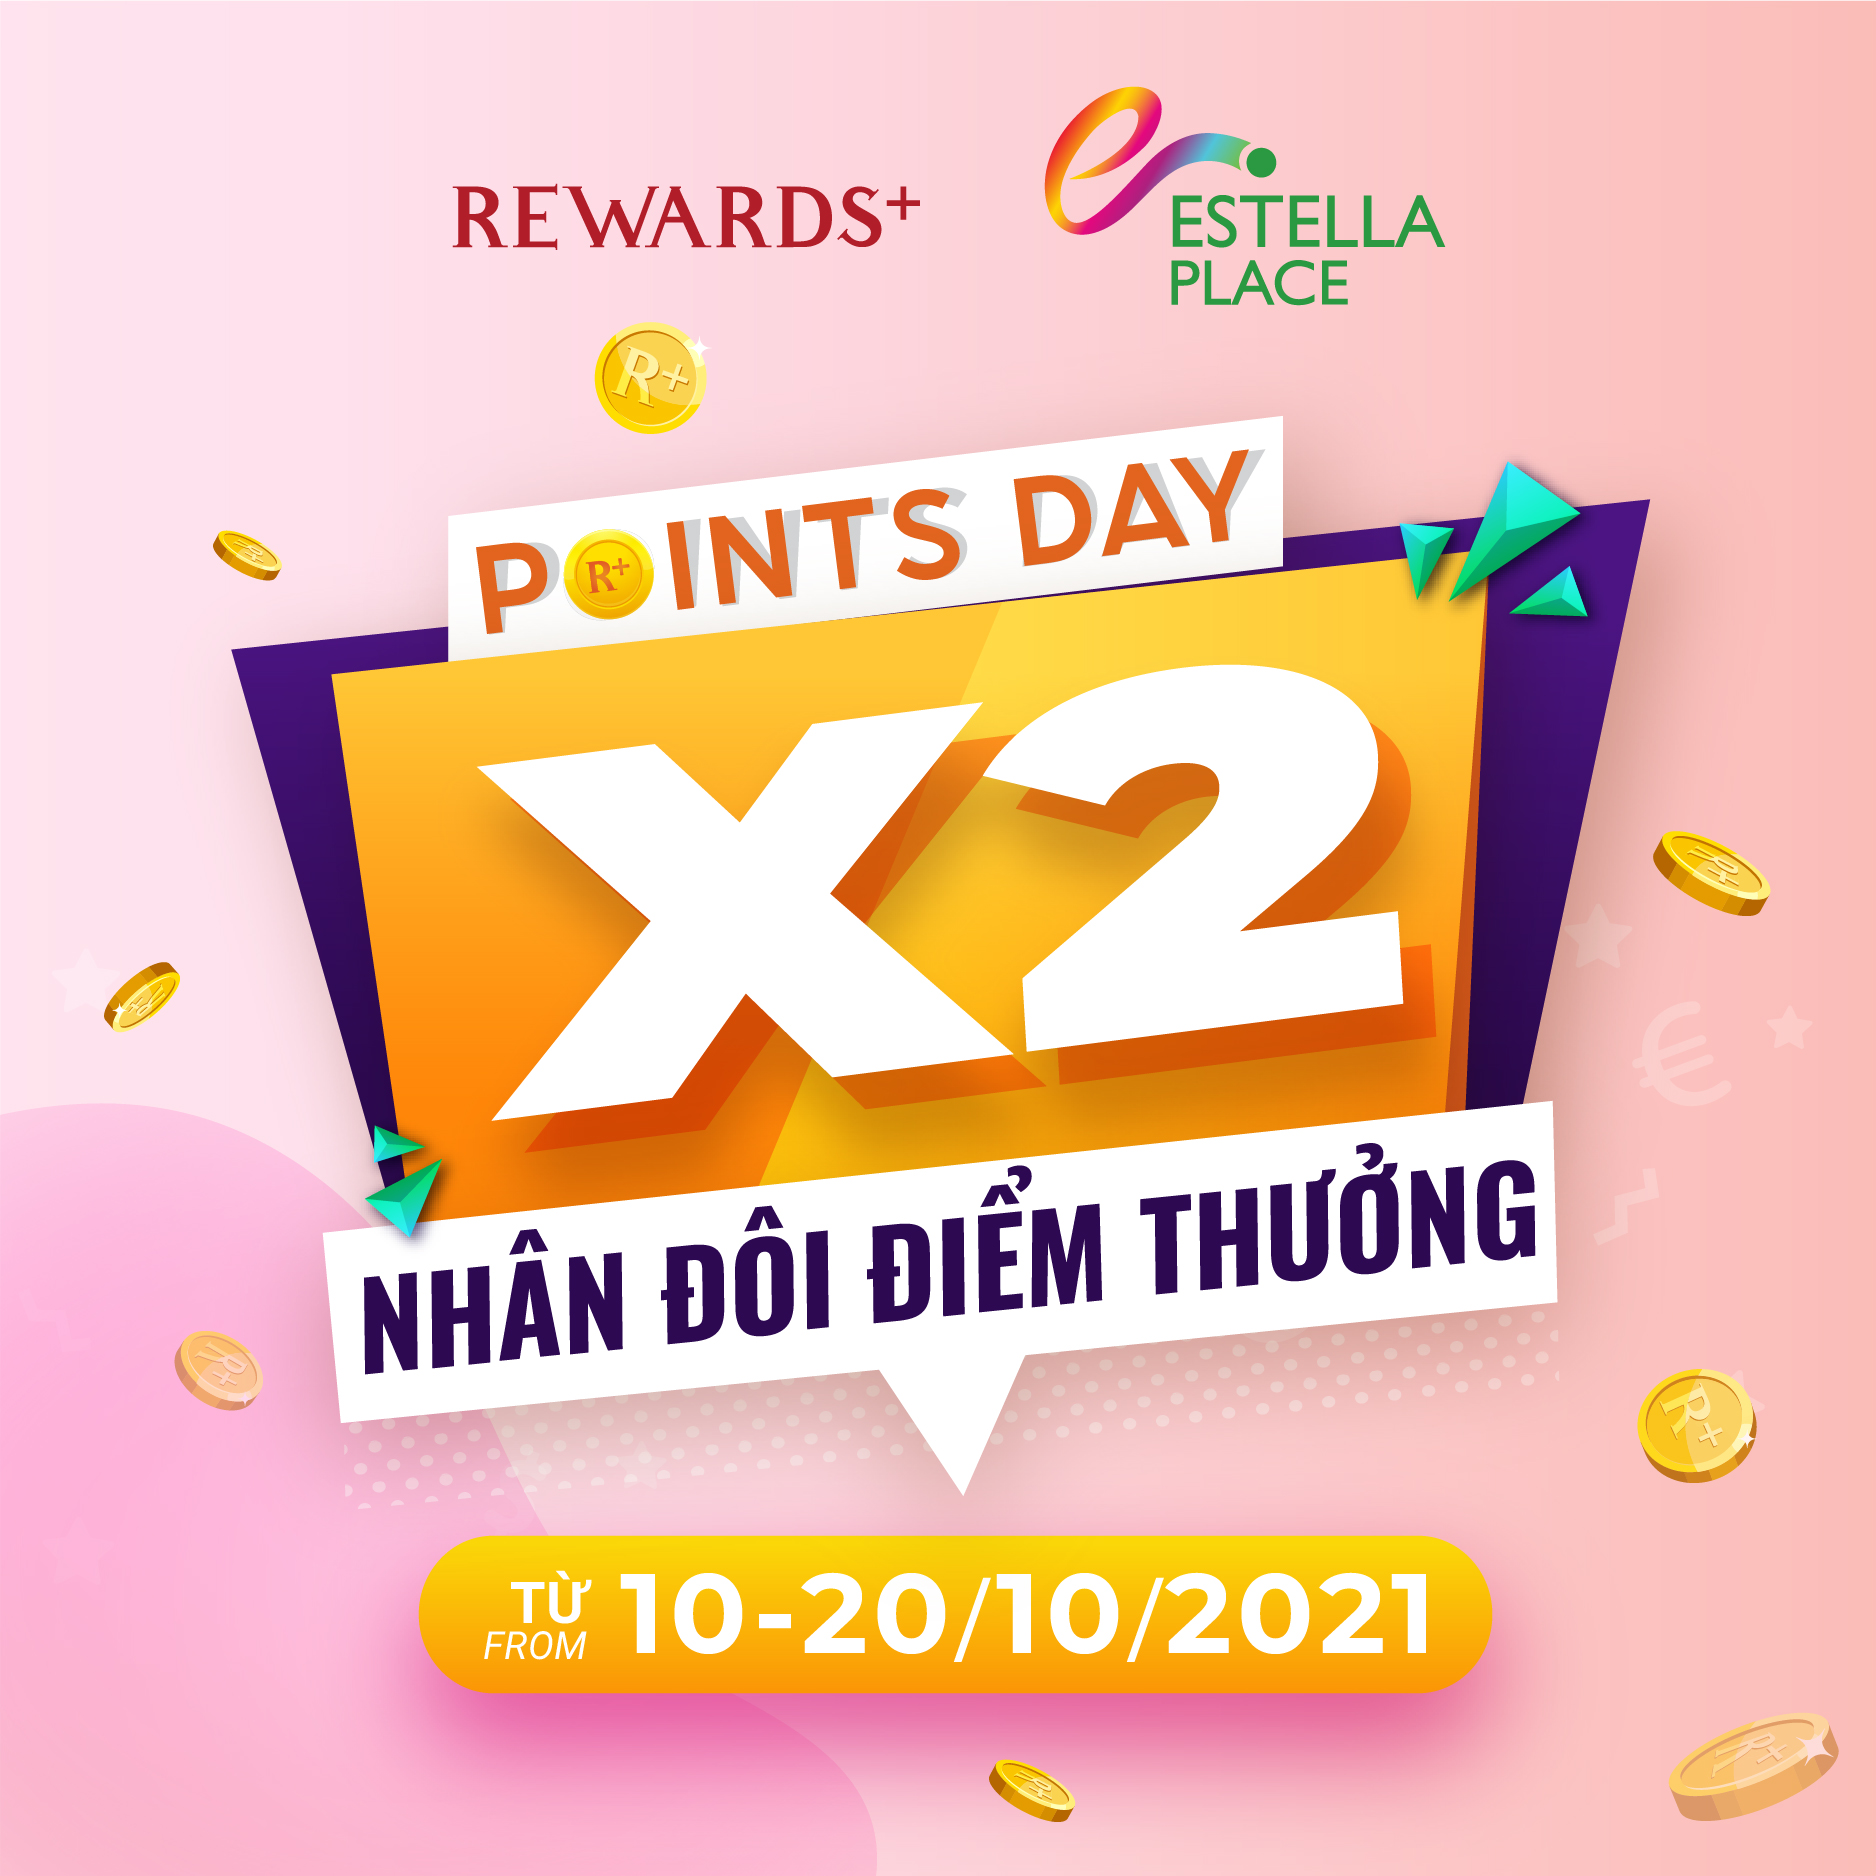 REWARD POINTS DOUBLE FOR ALL SHOPPING RECEIPTS FROM 10 – 20 OCTOBER 2021